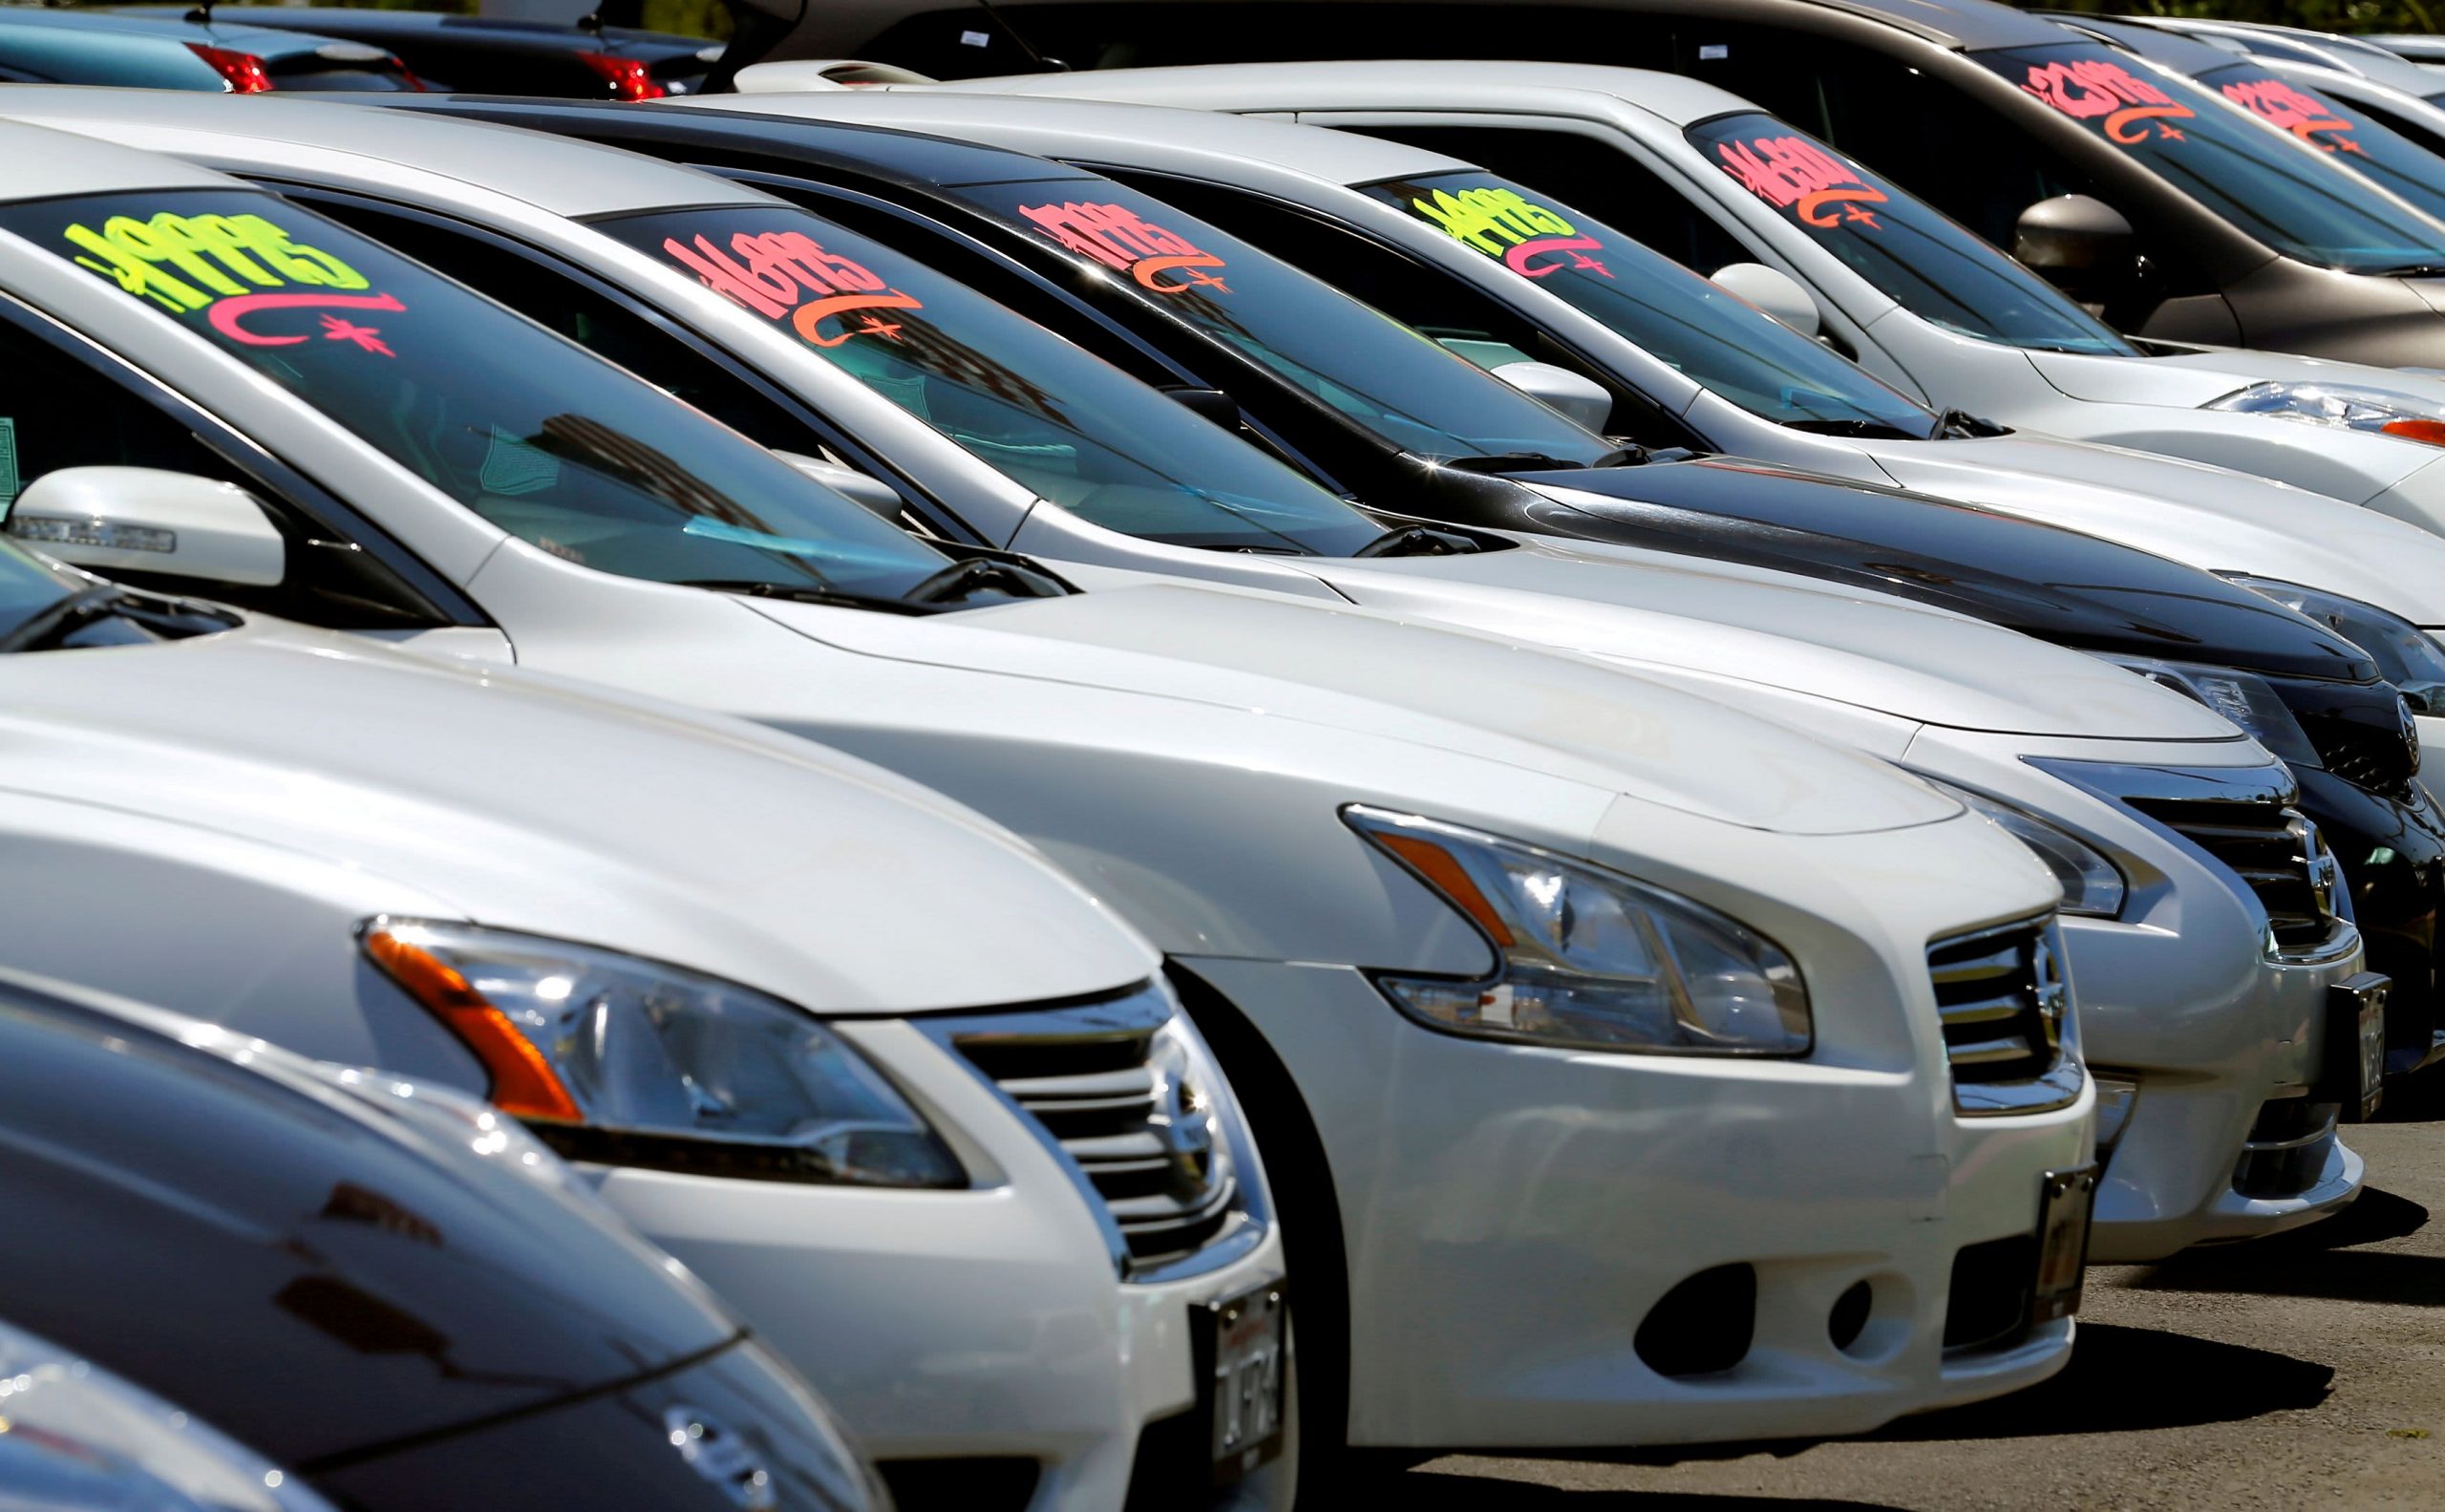 Soaring used vehicle prices haven’t cooled demand